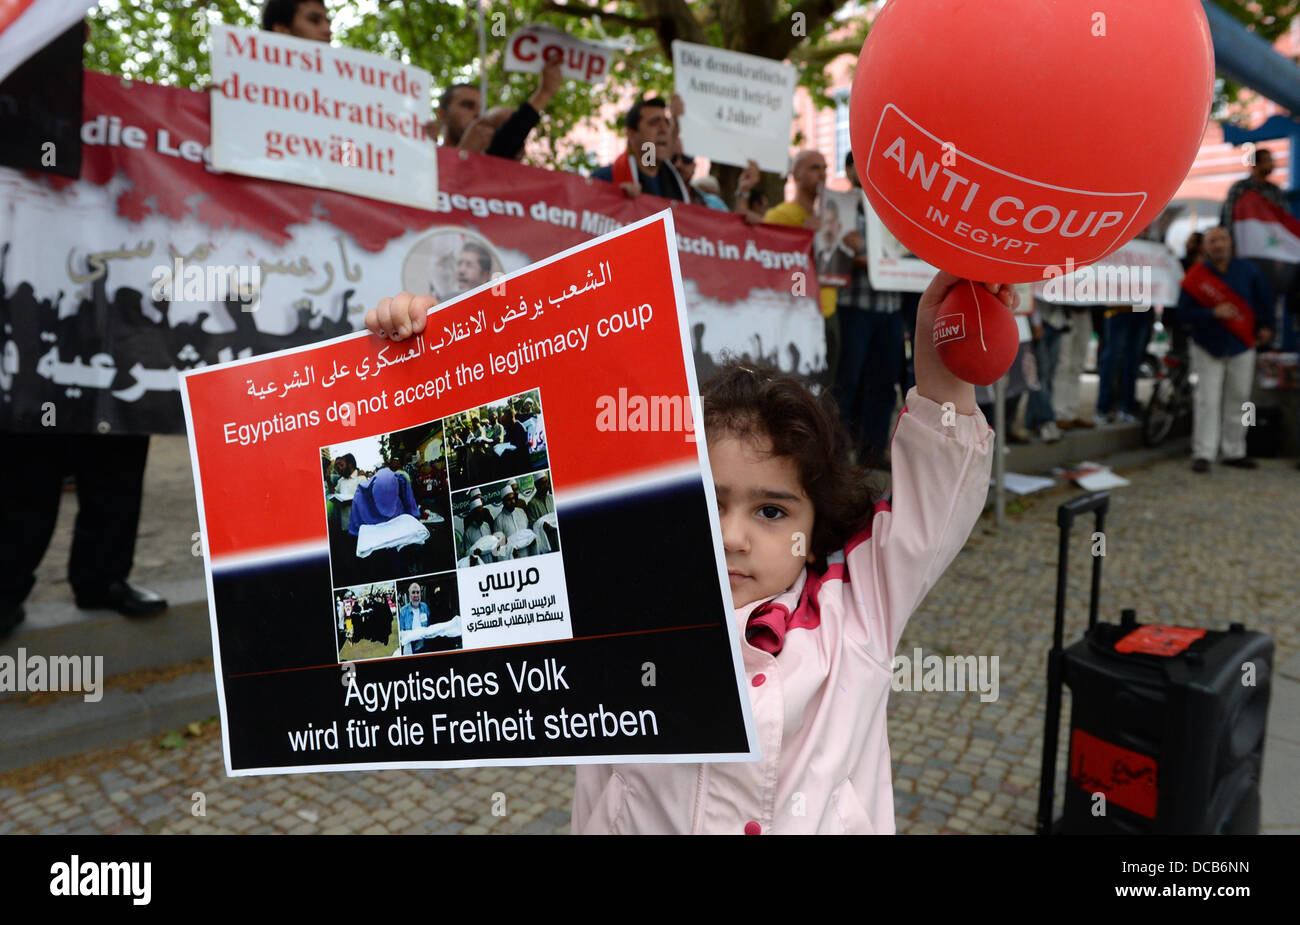 Berlin, Germany. 14th Aug, 2013. Malak (3) holds a poster reading 'Aegyptisches Volk wird für die Freiheit sterben' ('Egypt people will die for freedom') during a demonstration in front of the Foreign Office in Berlin, Germany, 14 August 2013. The protestors demand that the German government intervene to end the bloody conflict. Photo: MATTHIAS BALK/dpa/Alamy Live News Stock Photo